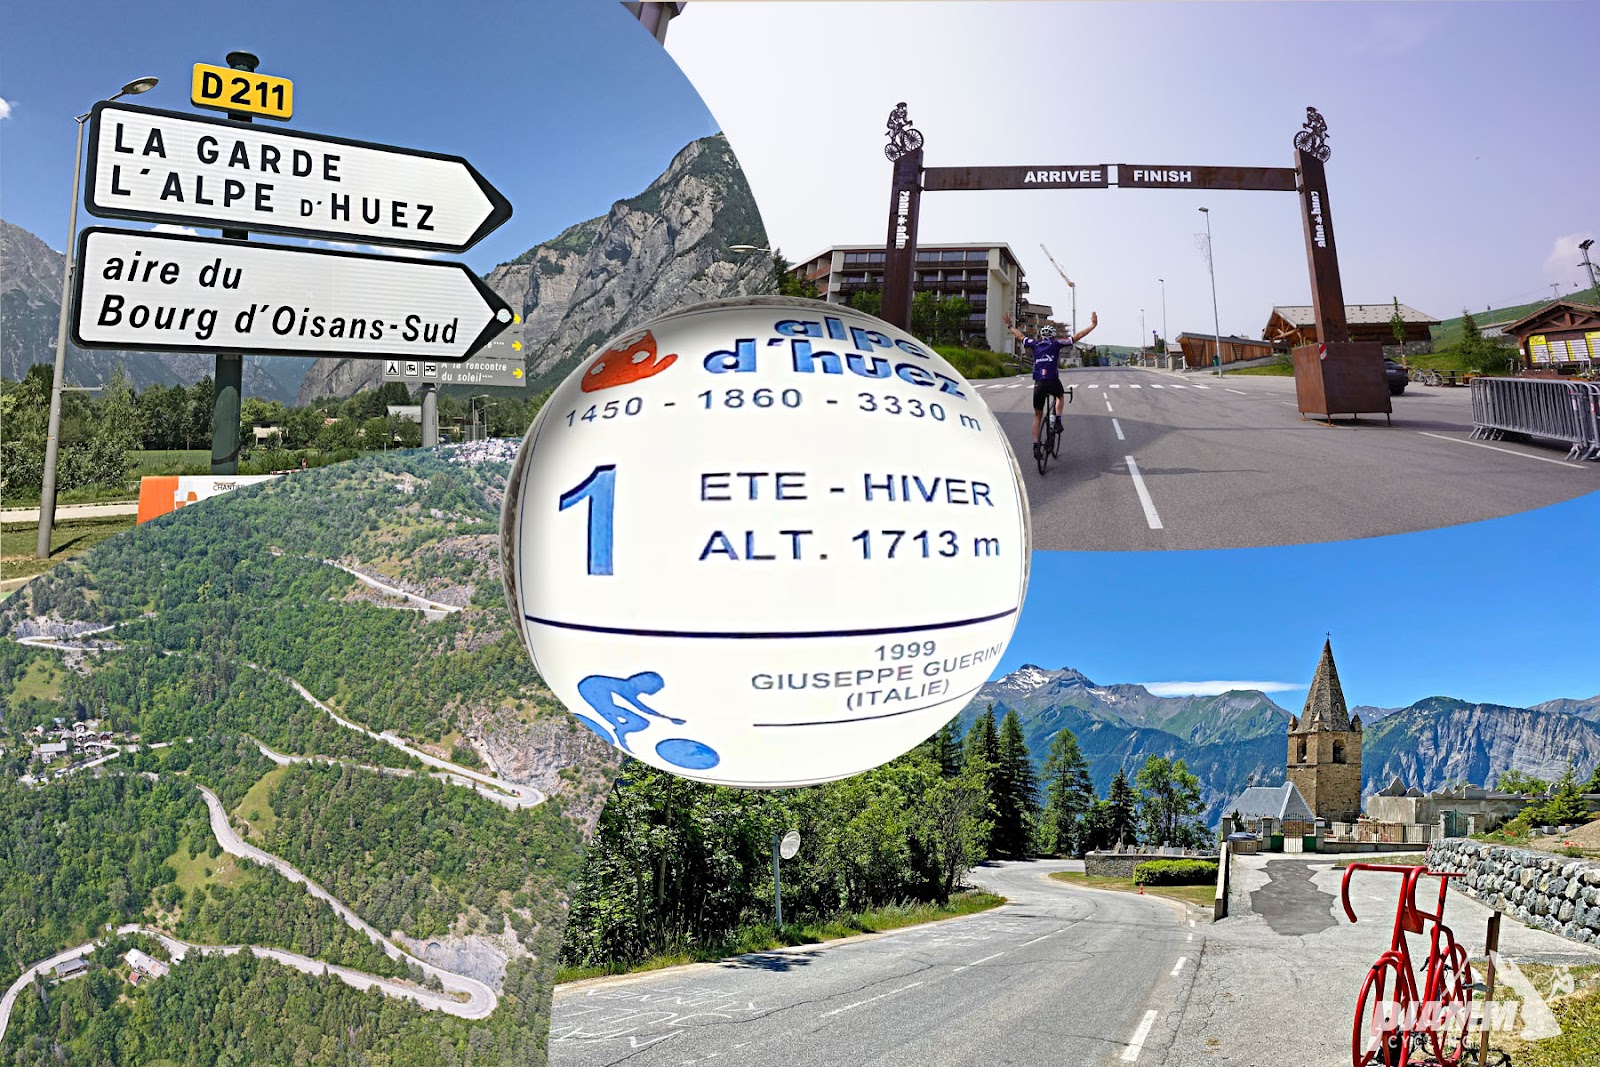 photo collage shows signs for La Garde l'Alpe d'Huez, Tour de France Finish/Start sign, French Alps views, aerial drone view showing switchbacks up climb